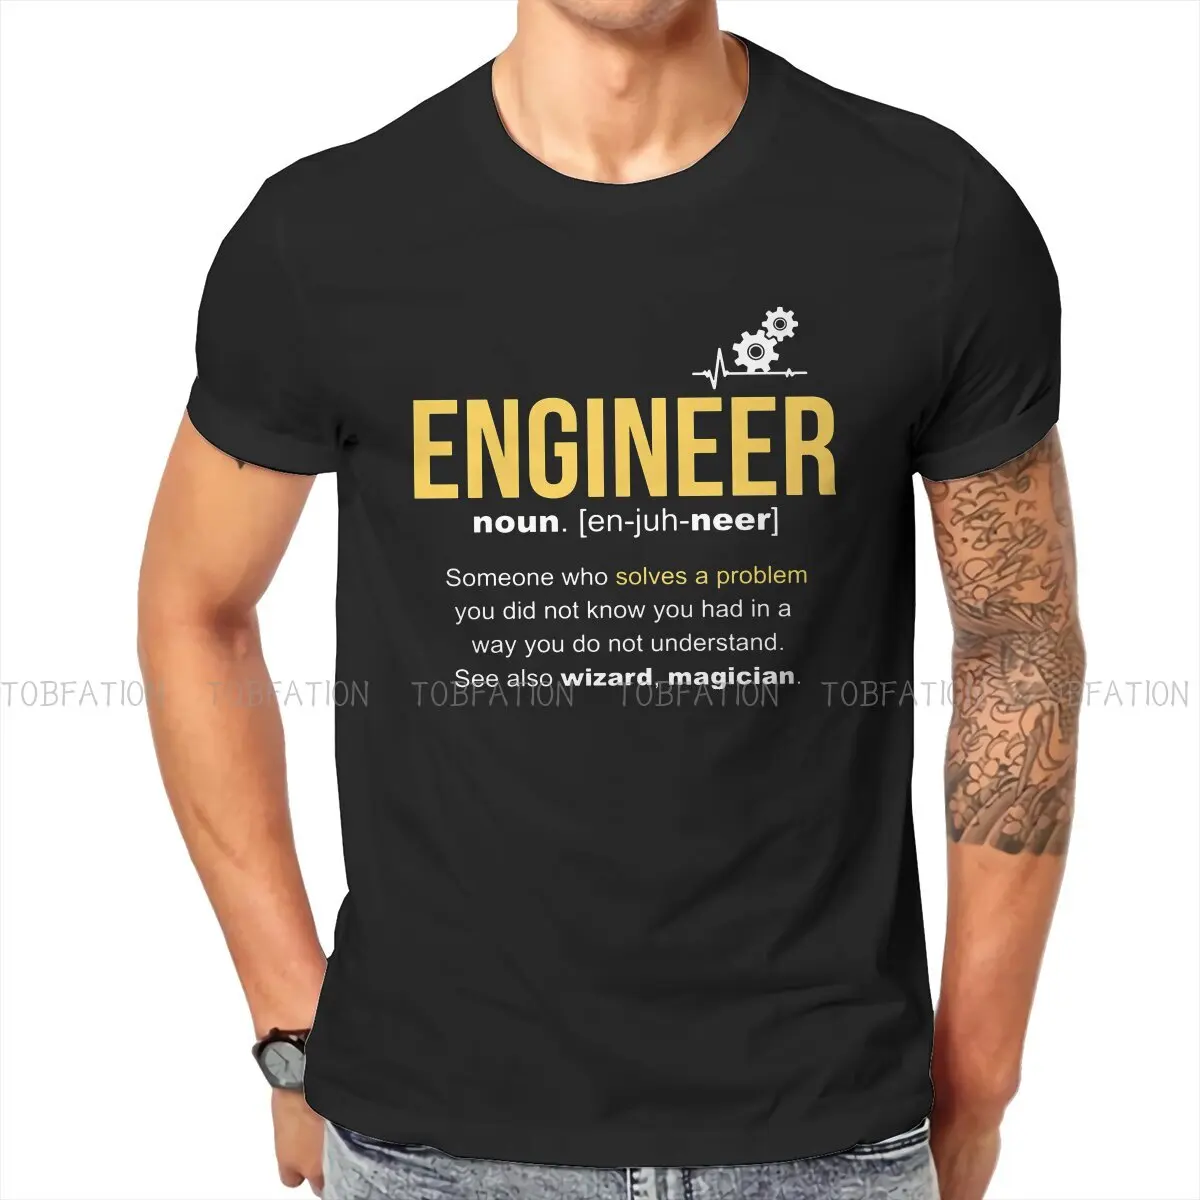 

Engineer Definition Man's TShirt Software Developer IT Programmer Geek O Neck Tops Fabric T Shirt Top Quality Birthday Gifts